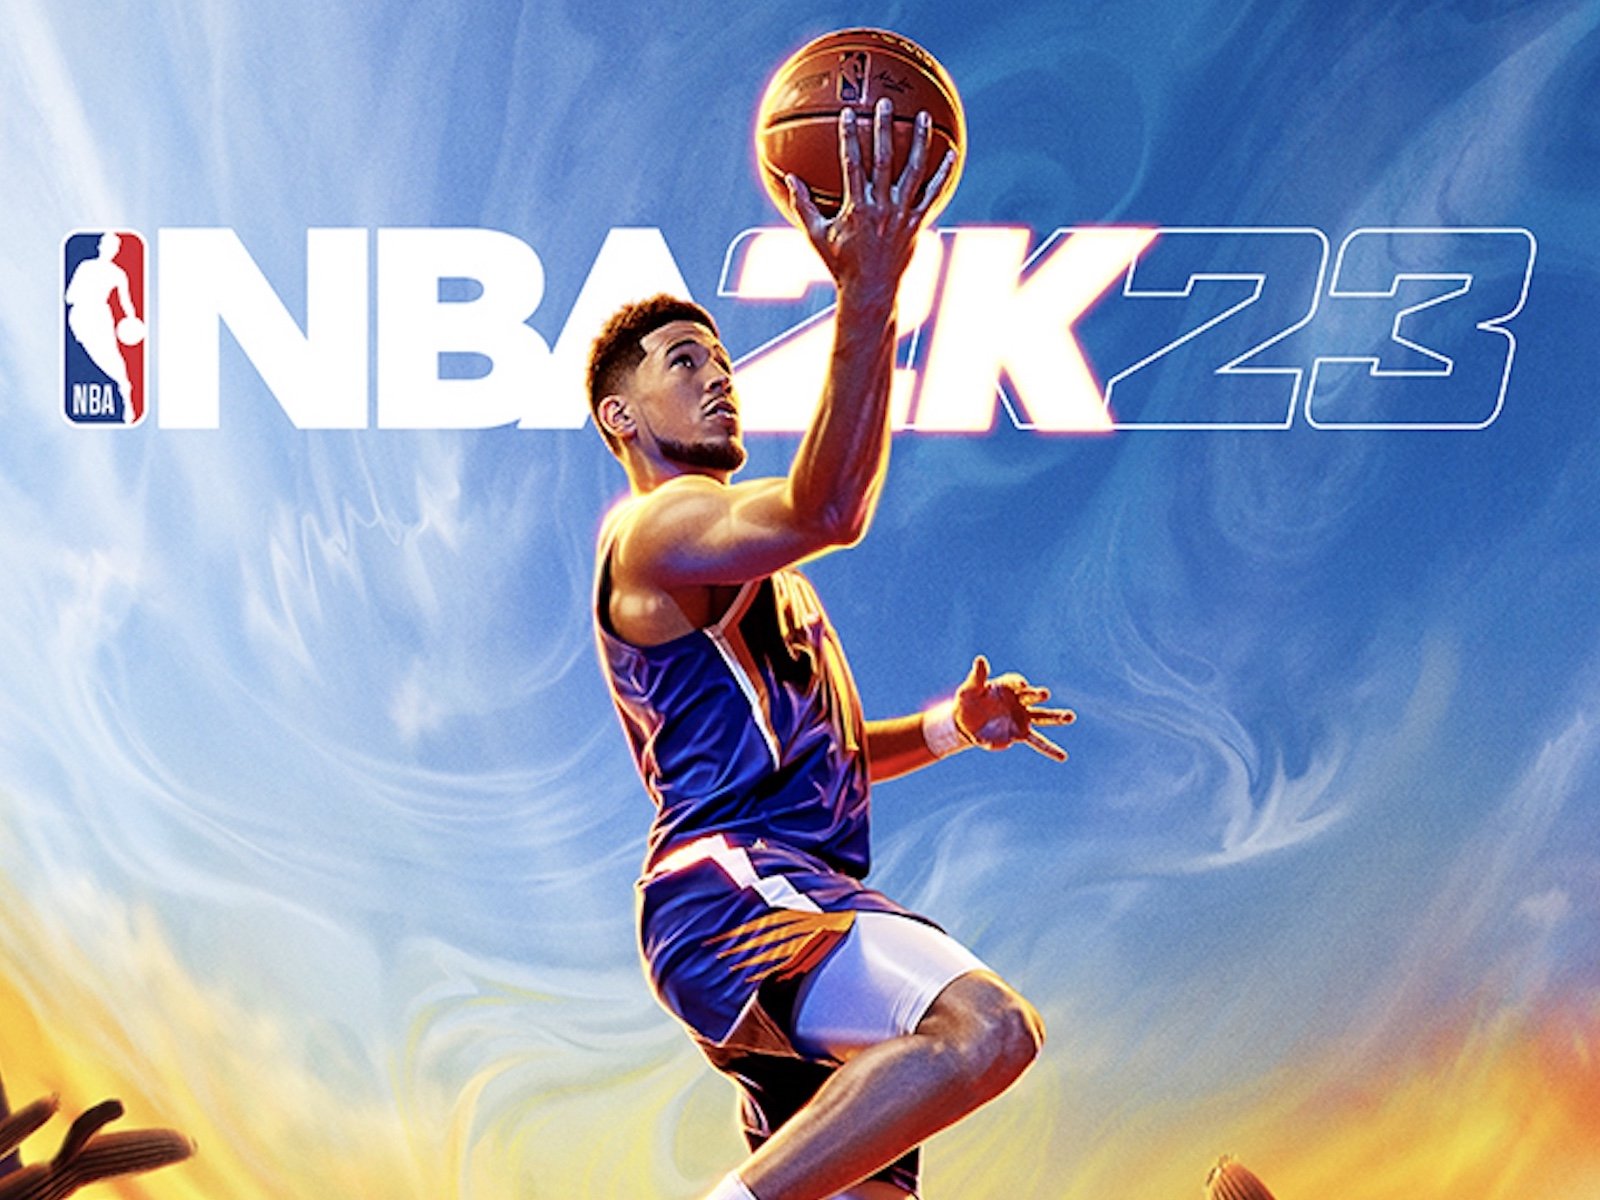 Kevin Durant's possible future teammate Devin Booker secures NBA 2K23 cover